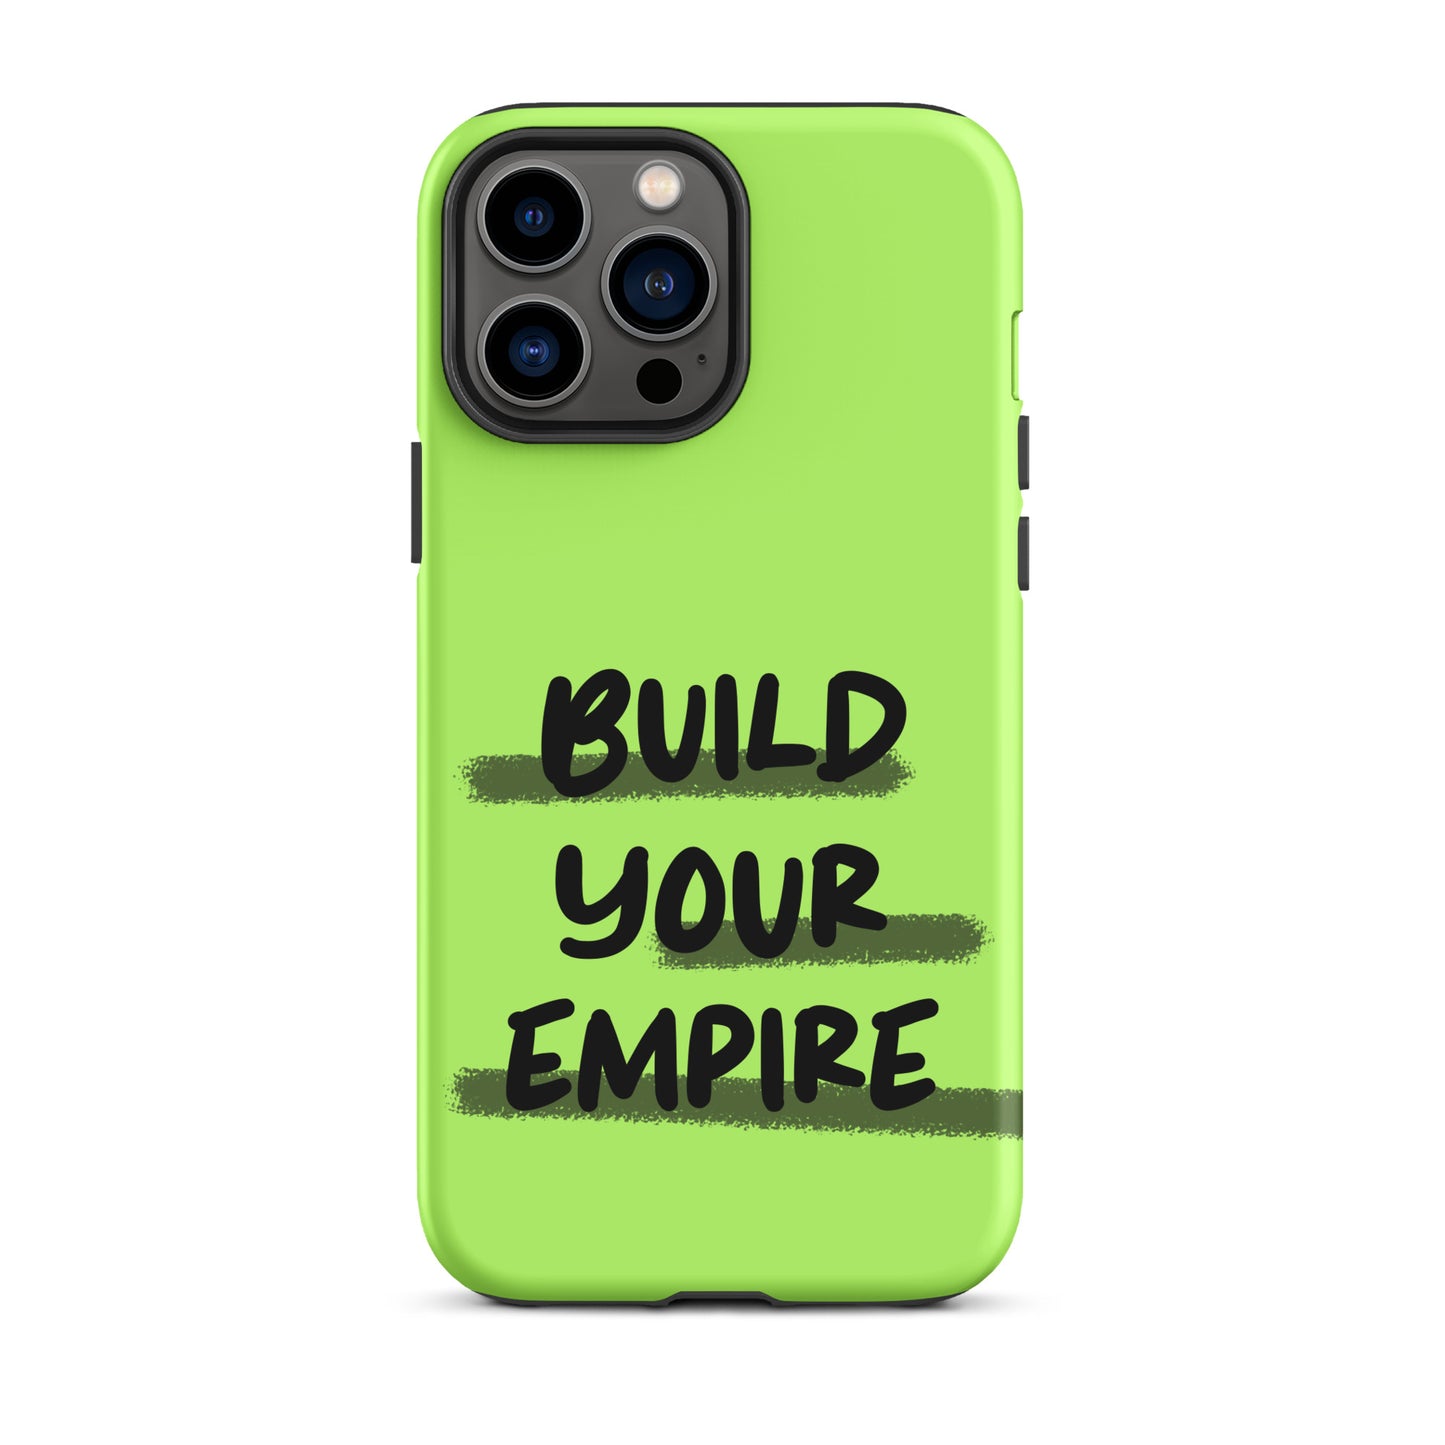 Build Your Empire - (Lime Green) Quoted iPhone Case